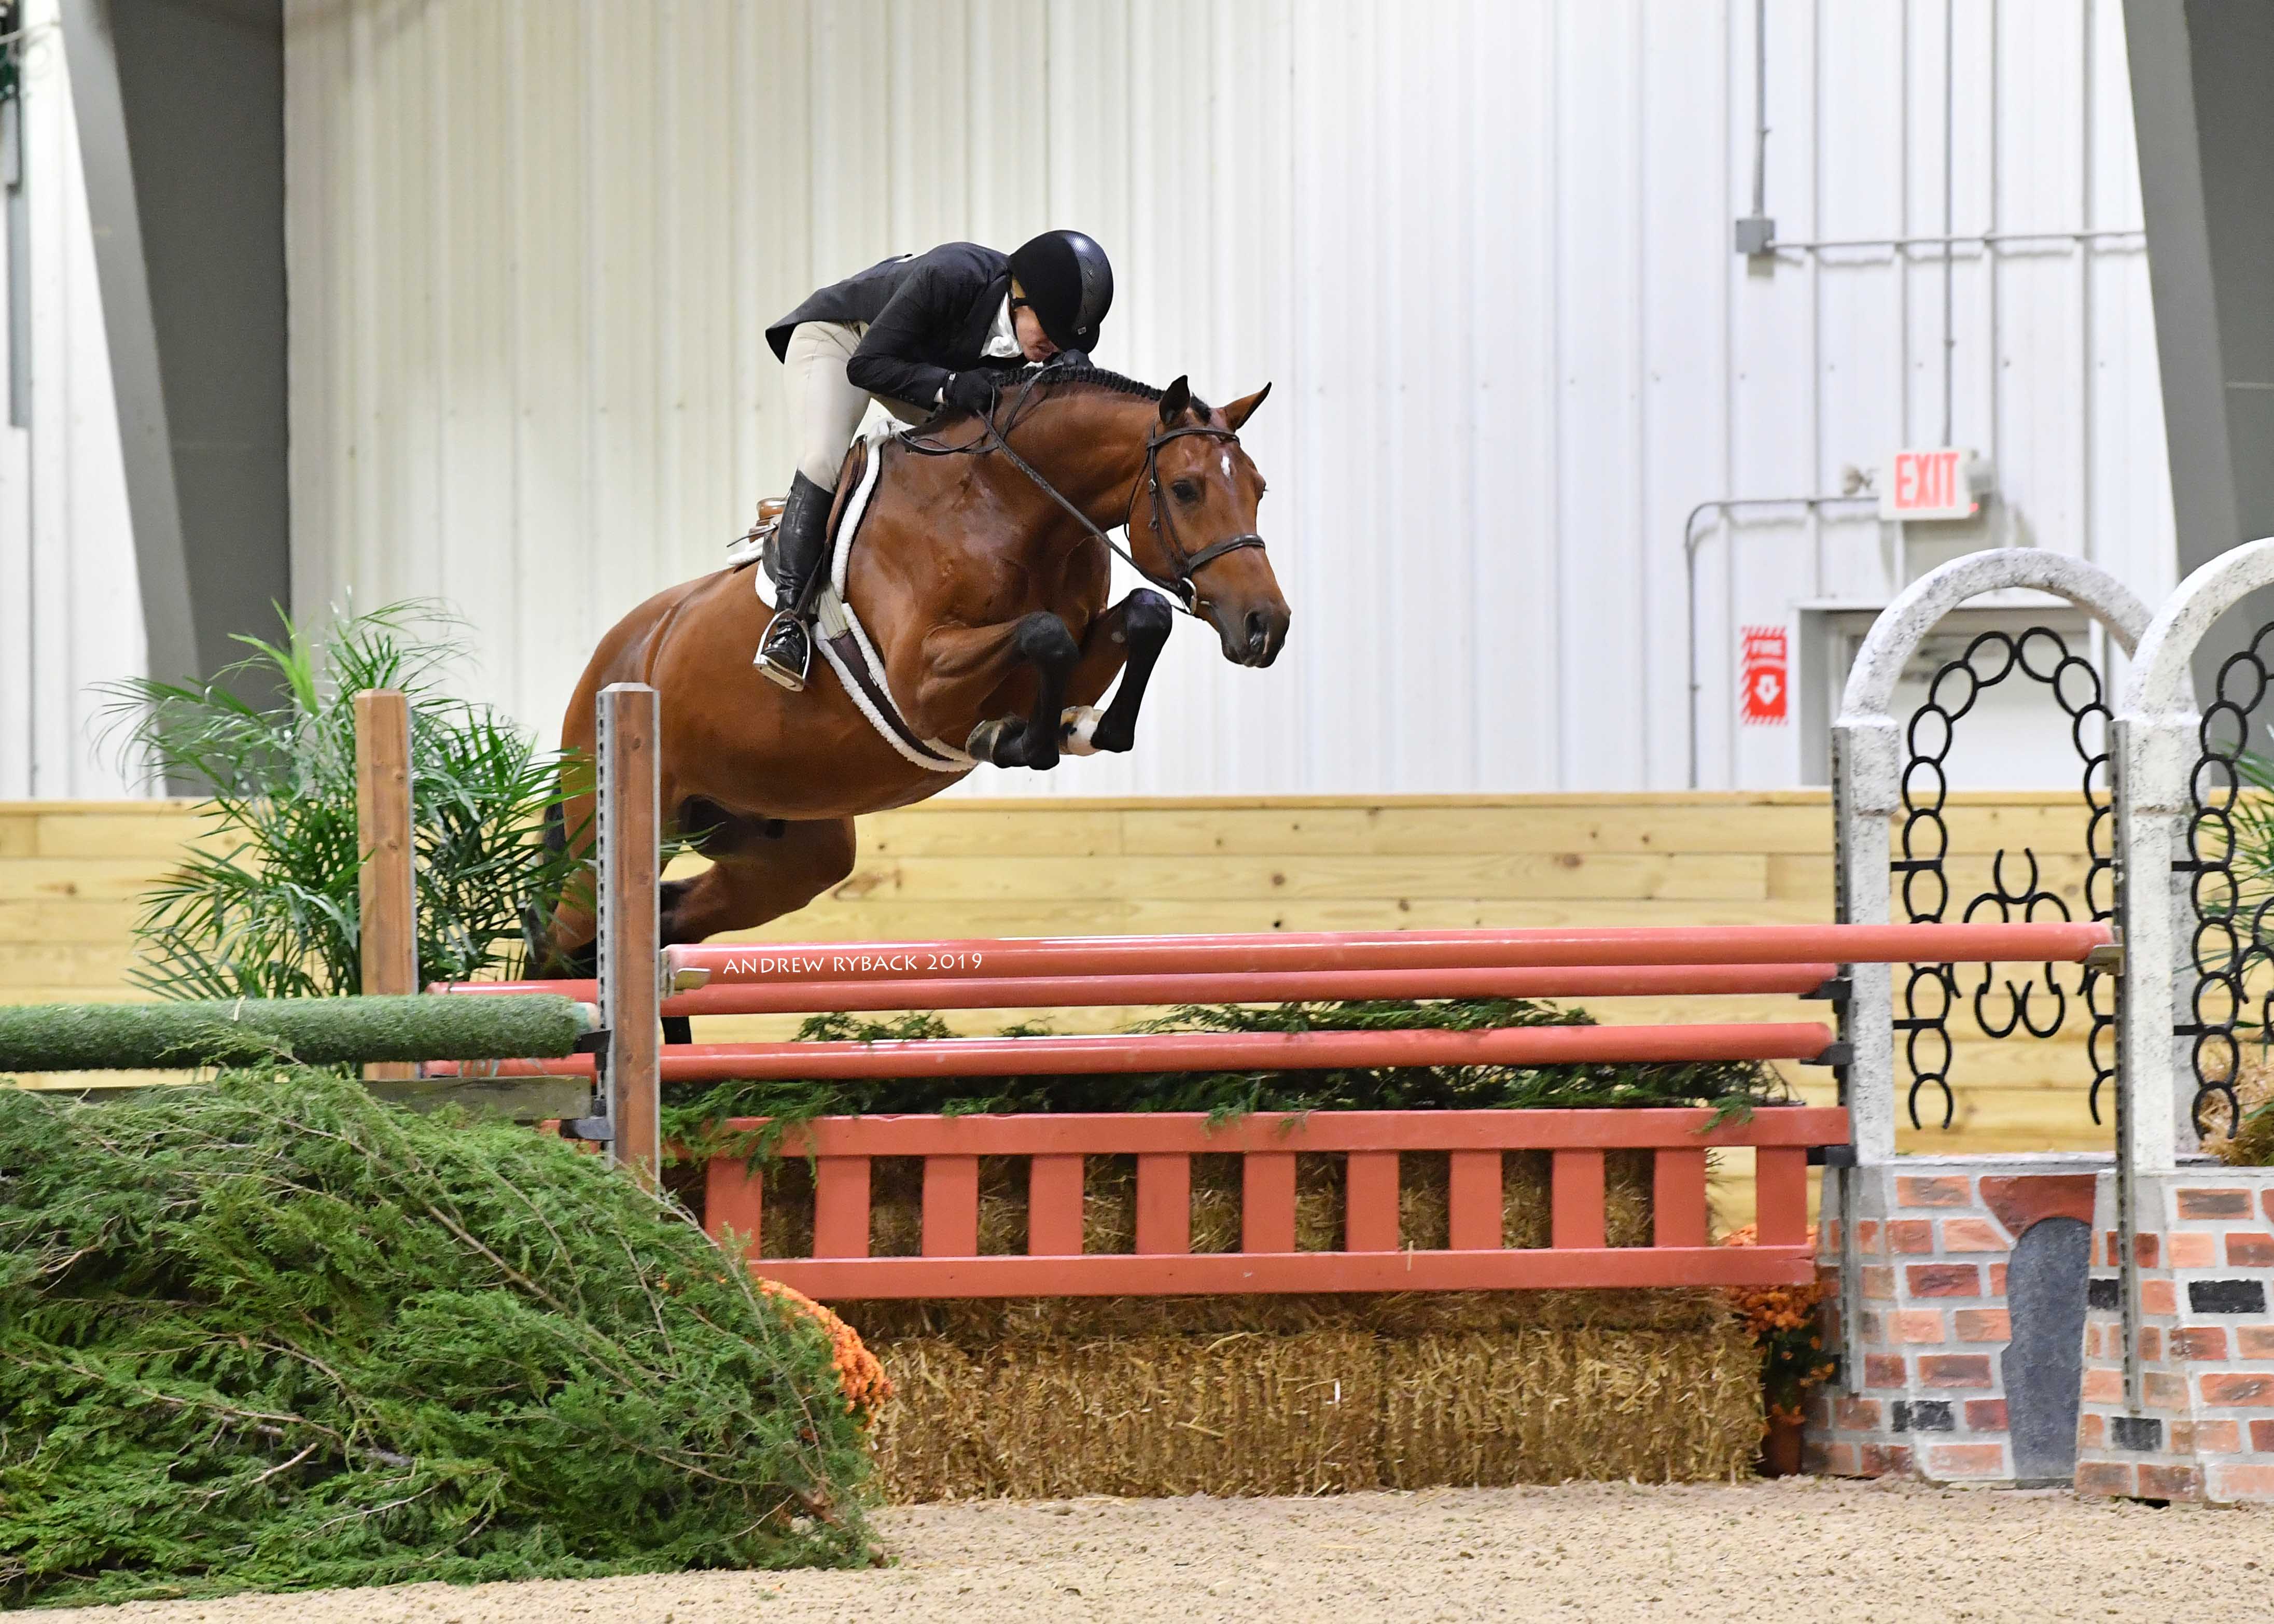 Greg Crolick and Take Honors USHJA $40,000 Equestrian the Hunter Derby Z - in Top World Corallo International Center